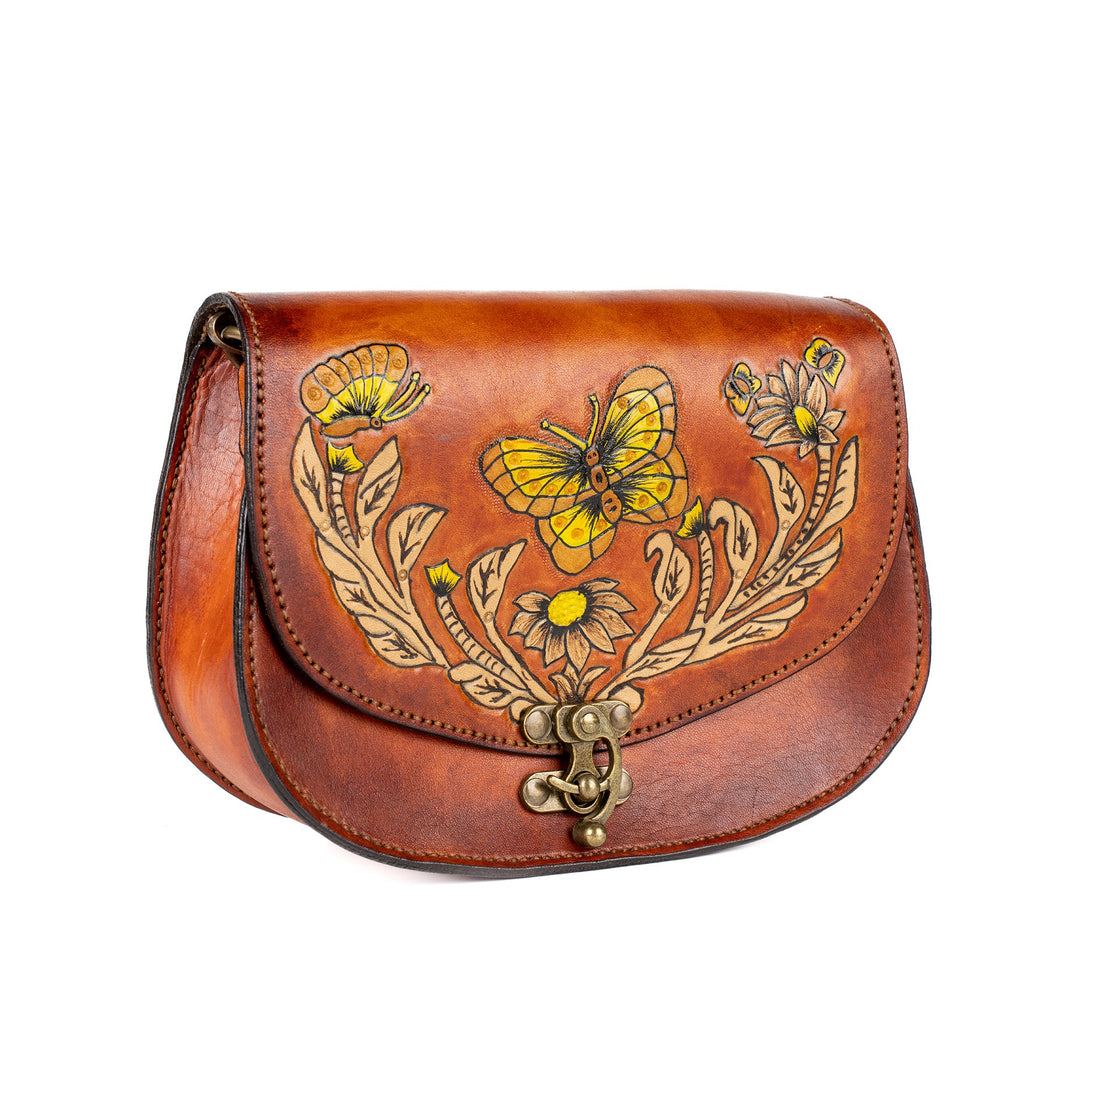 Kilidos Leather Carved & Crafted Hand Bag - Tan - Handbags Zengoda Shop online from Artisan Brands